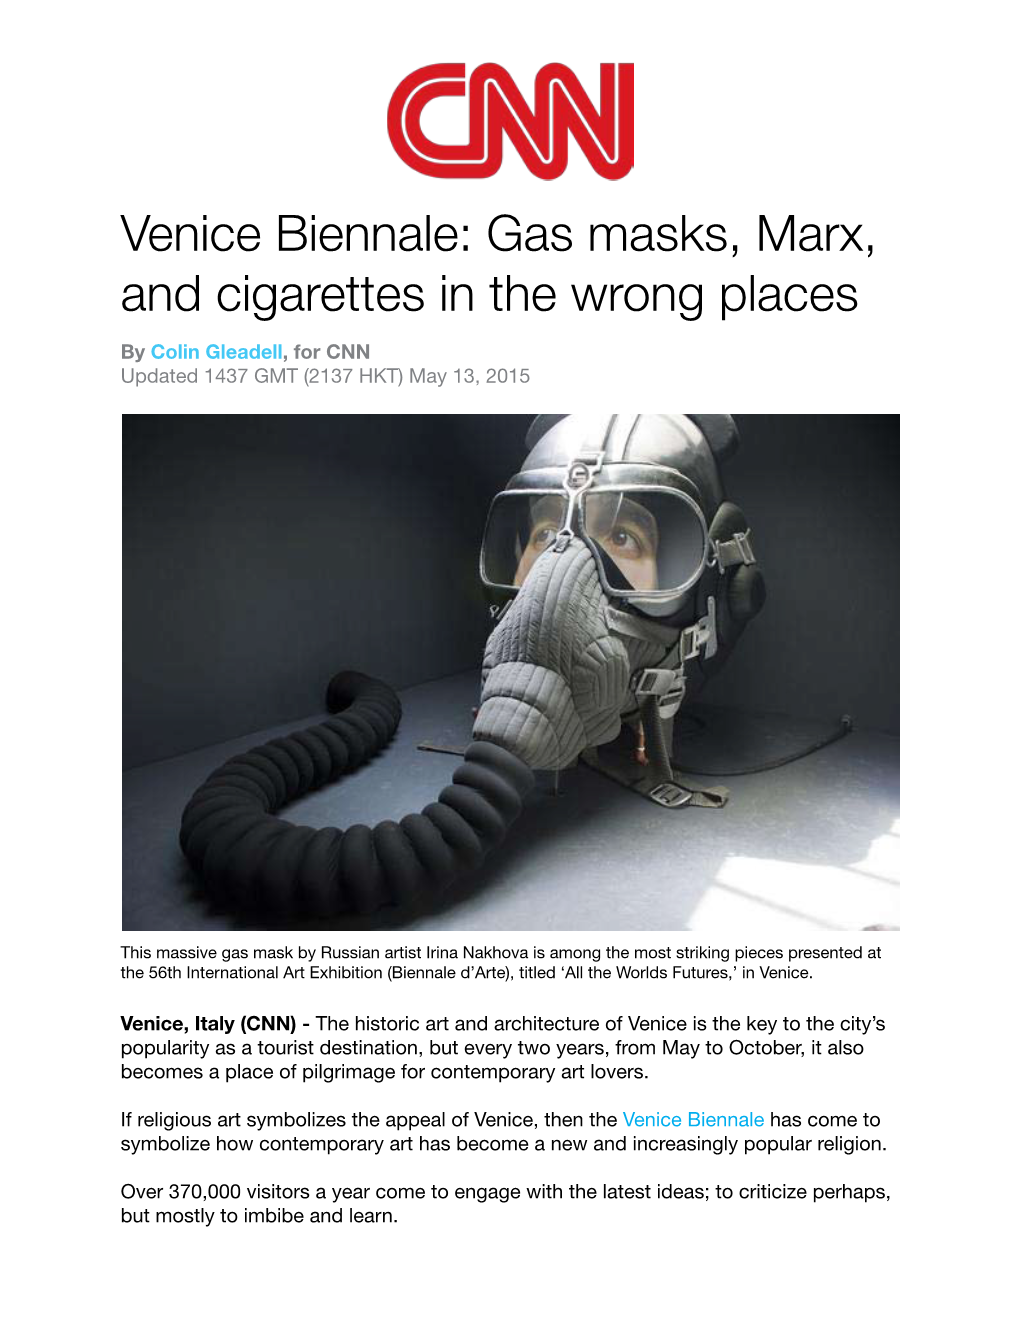 "Venice Biennale: Gas Masks, Marx, and Cigarettes In